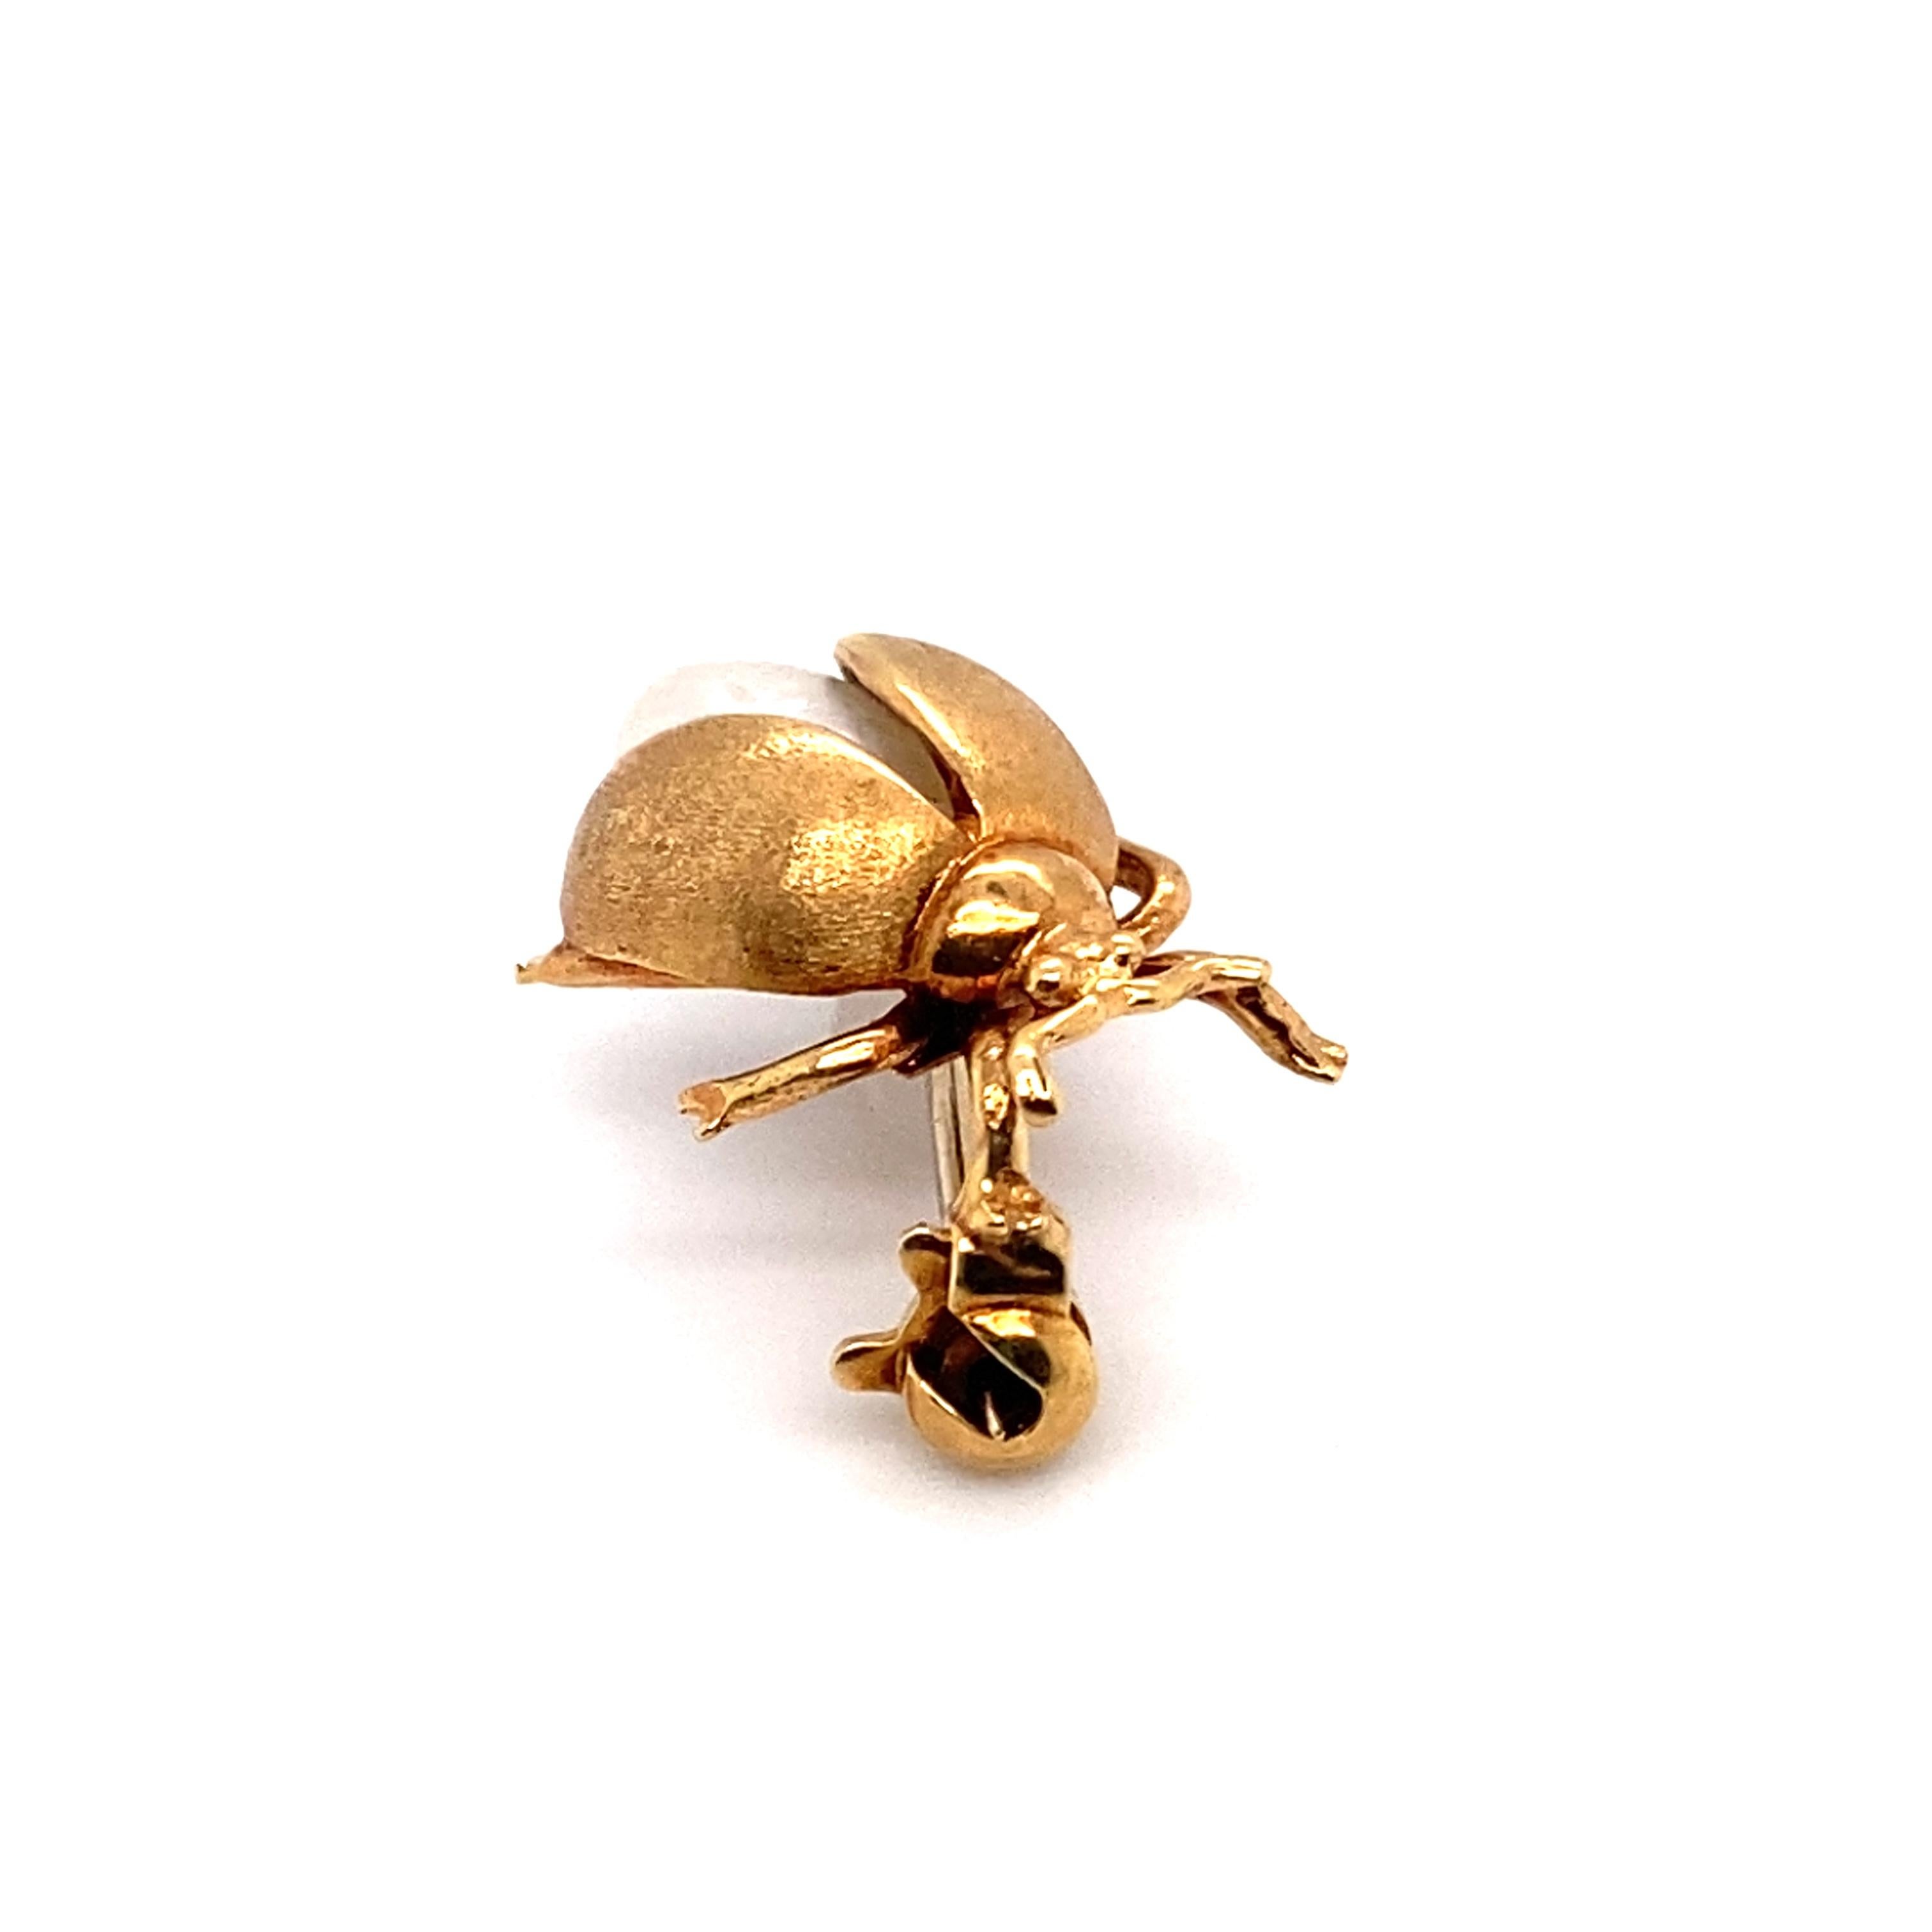 Item Details:
Metal type: 18 Karat Yellow Gold
Gemstones: Pearl
Weight: 2.4 grams
Measures .50 inch (length) x .25 inch (width)

Item Features:
This beautiful Vintage Lady Bug pin was crafted in the 1950s. It features a Keshi pearl as the abdomen,